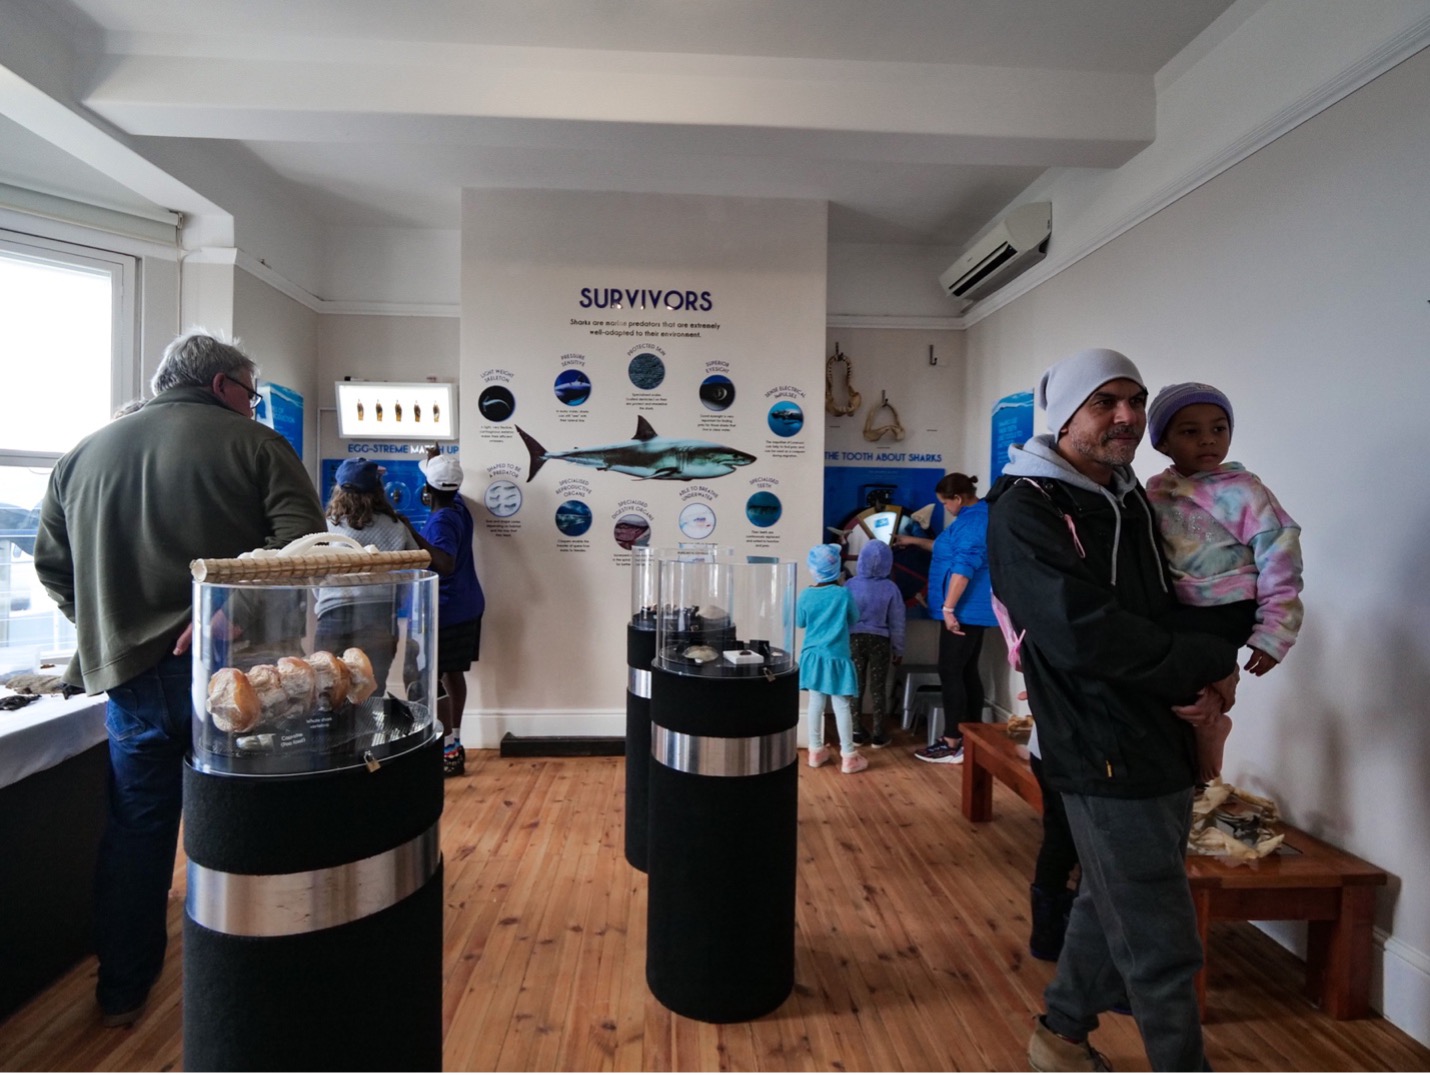 The general public can enjoy free guided tours of our facilities, including interactive exhibit spaces like our Shark Central. Image by Danel Wentzel.